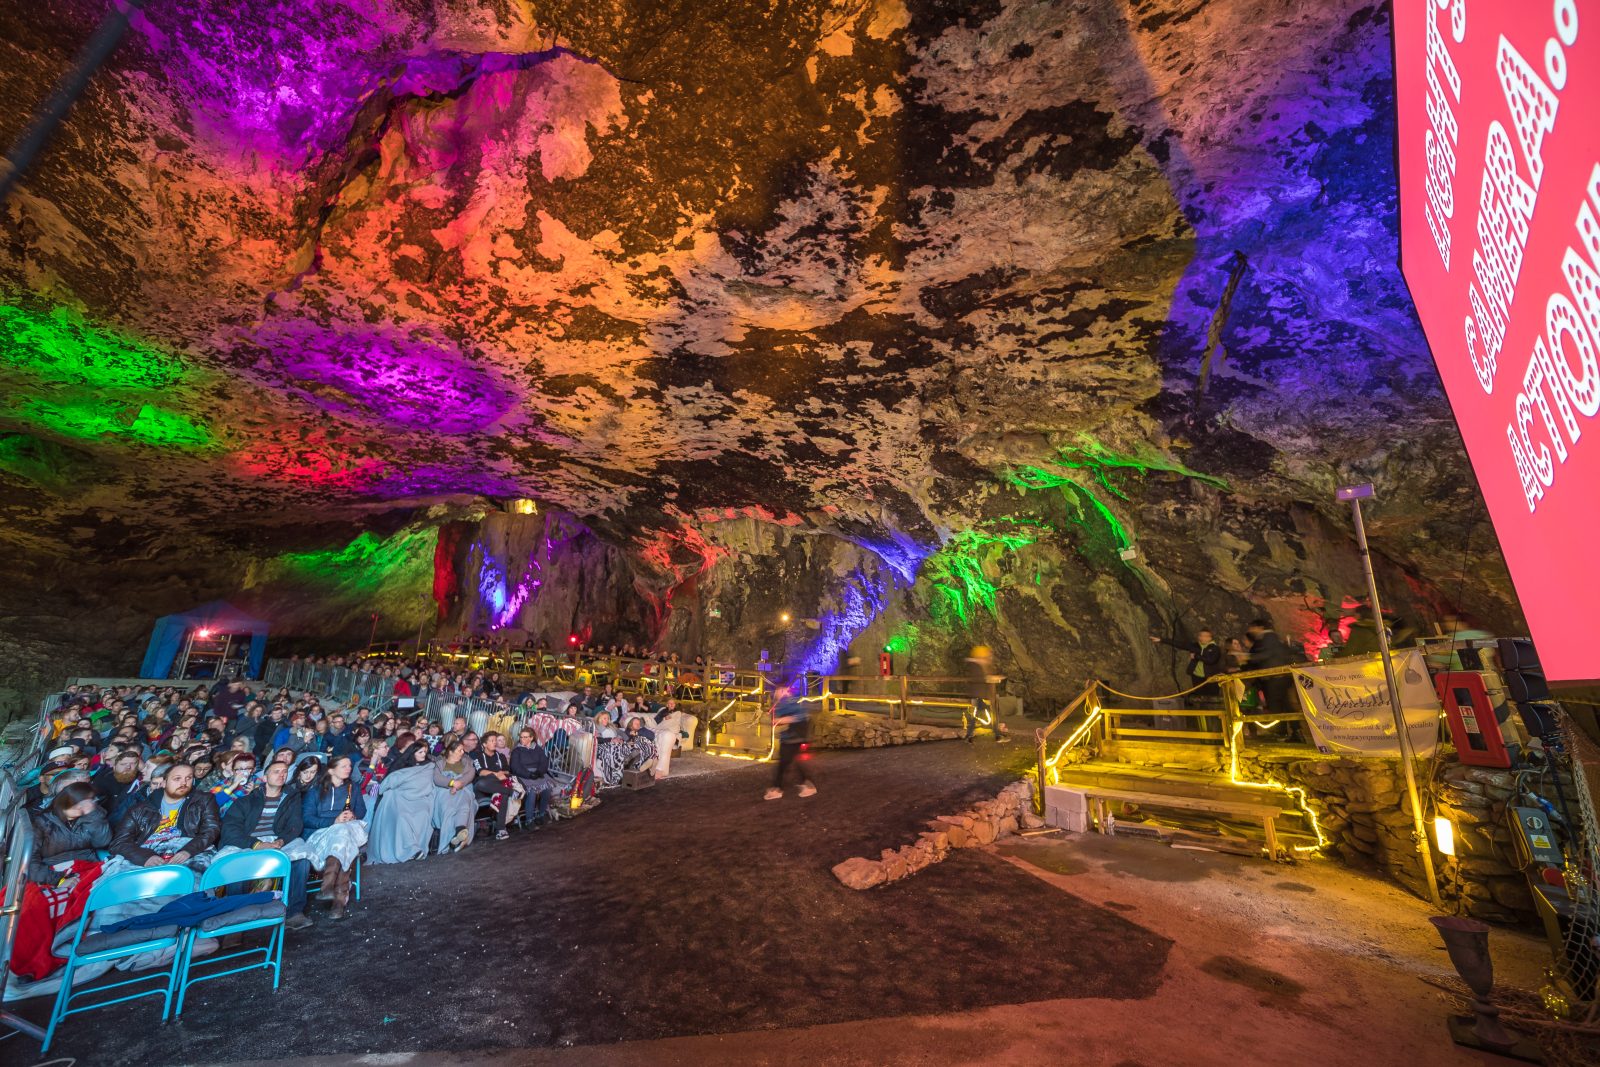 The beautiful Peak District cave that&#8217;s being turned into a cinema this spring, The Manc